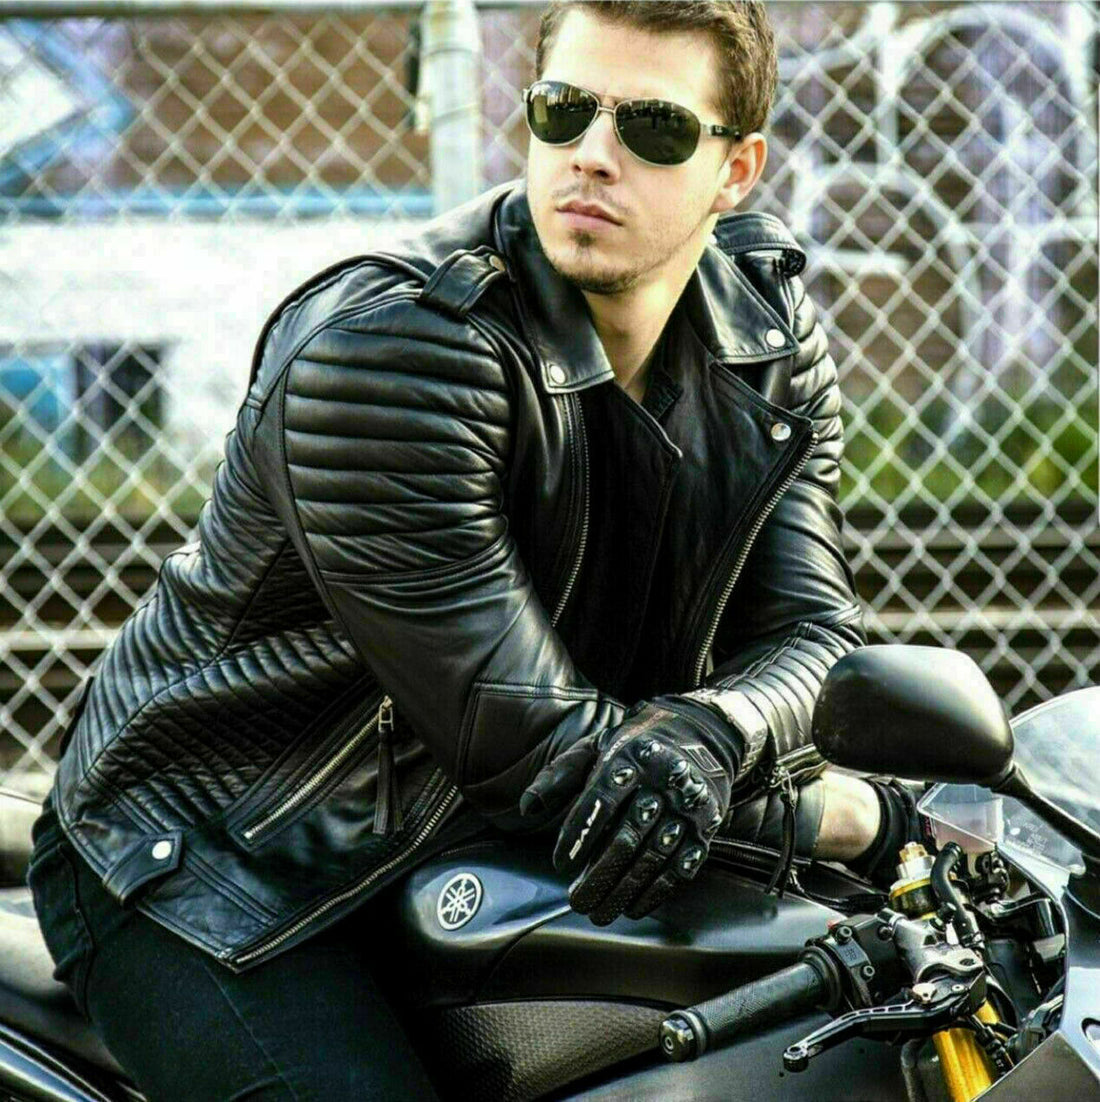 Why Biker Leather Jackets Are a Must-Have Fashion Statement